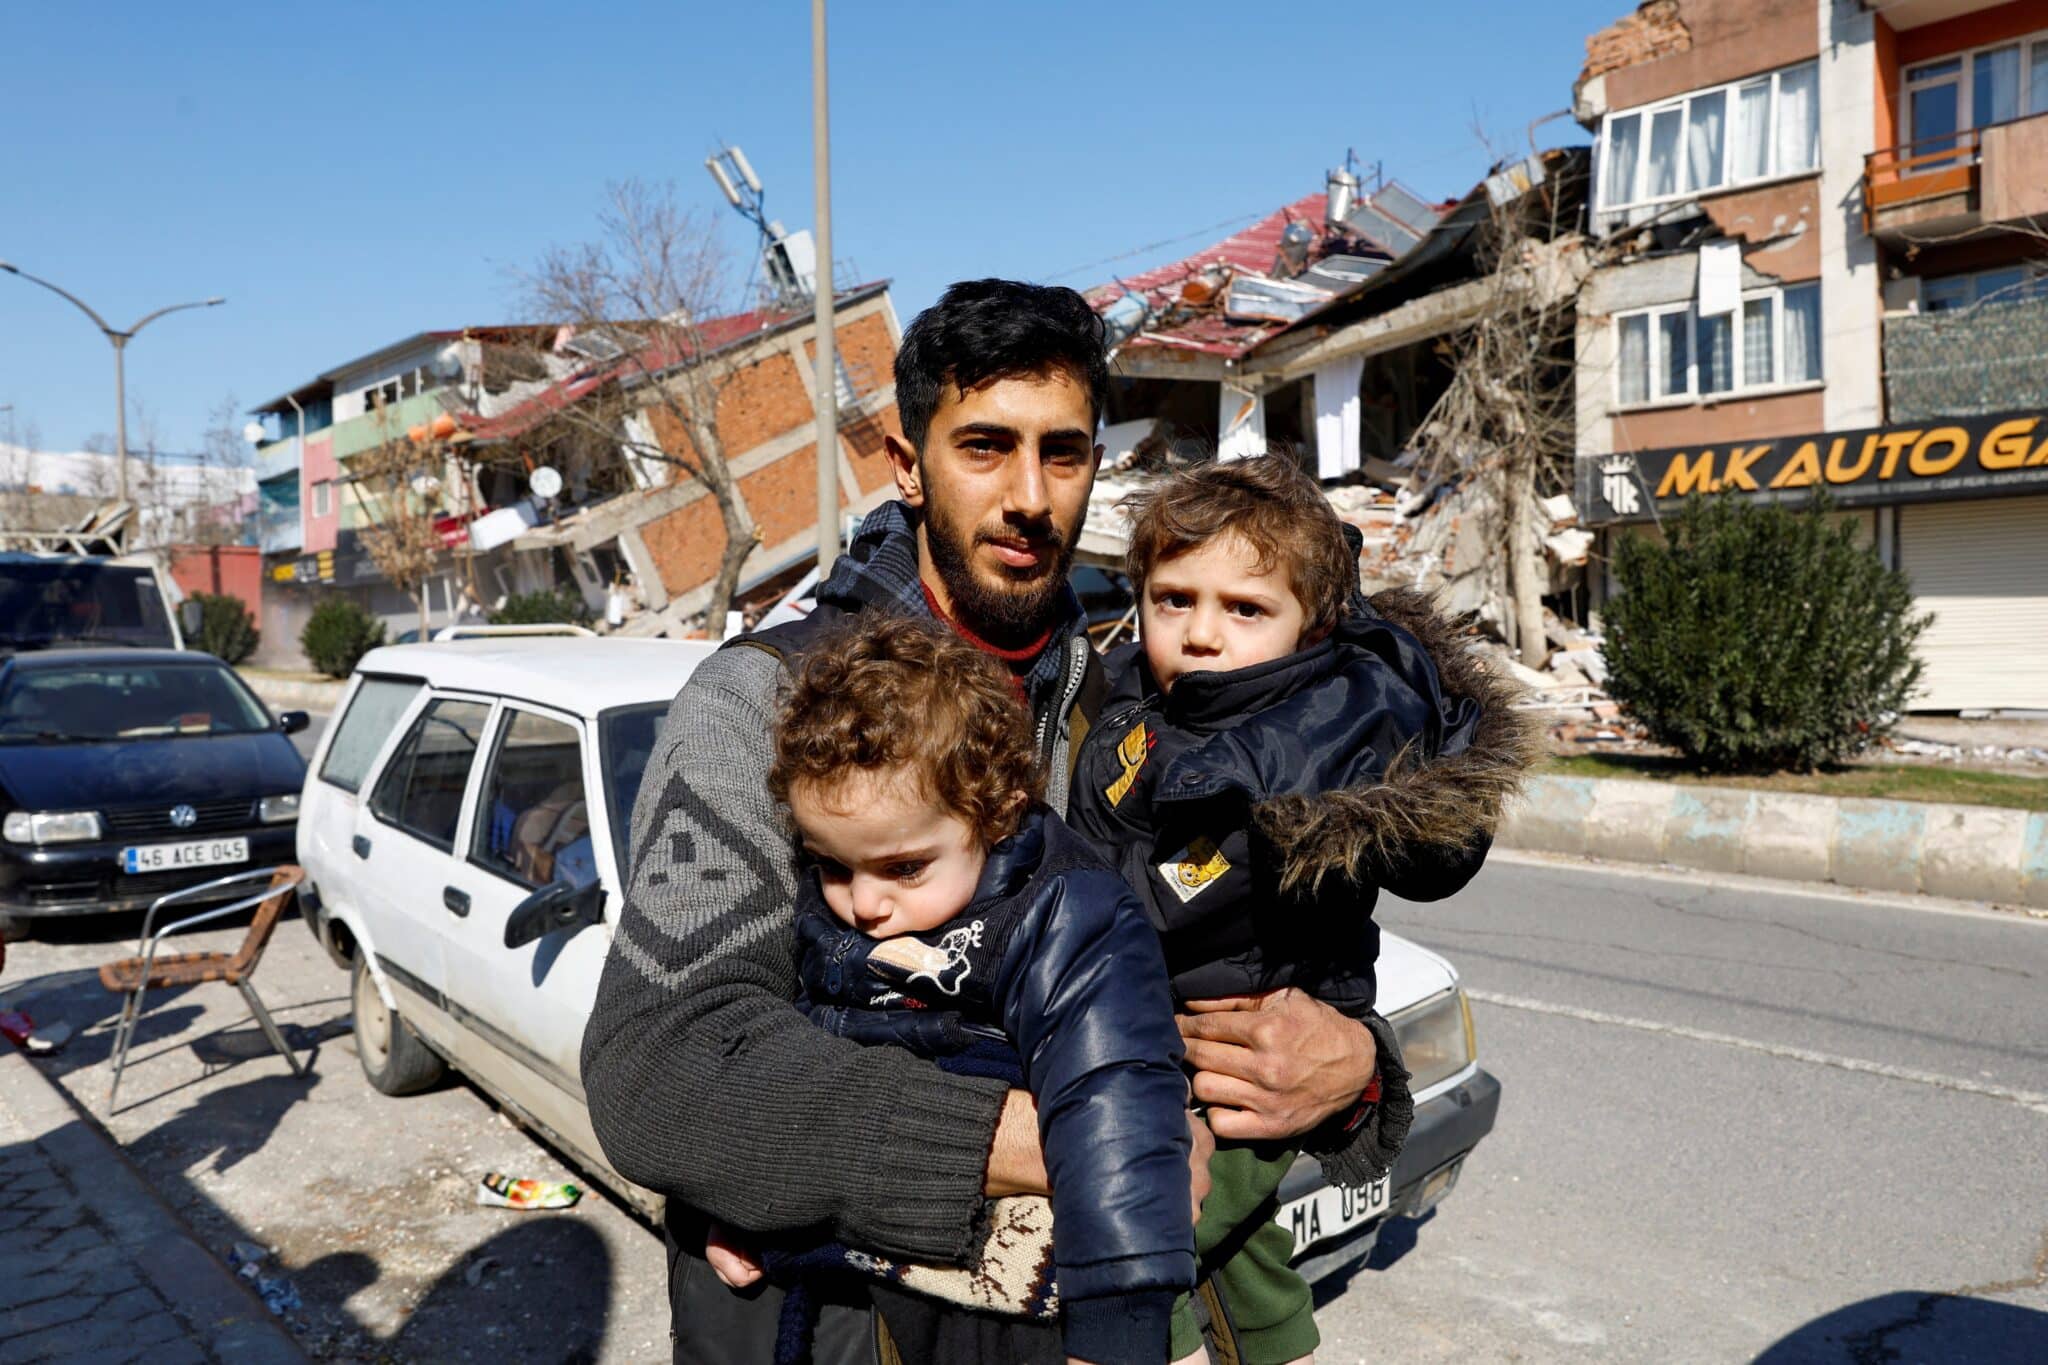 A member of a Syrian family carries children in Kahramanmaras, Turkey, Feb. 9, 2023, after his house in Turkey was destroyed in the deadly Feb. 6 earthquake. The family had moved to Turkey sometime after their house in Syria was destroyed during the war. (OSV News photo/Suhaib Salem, Reuters)